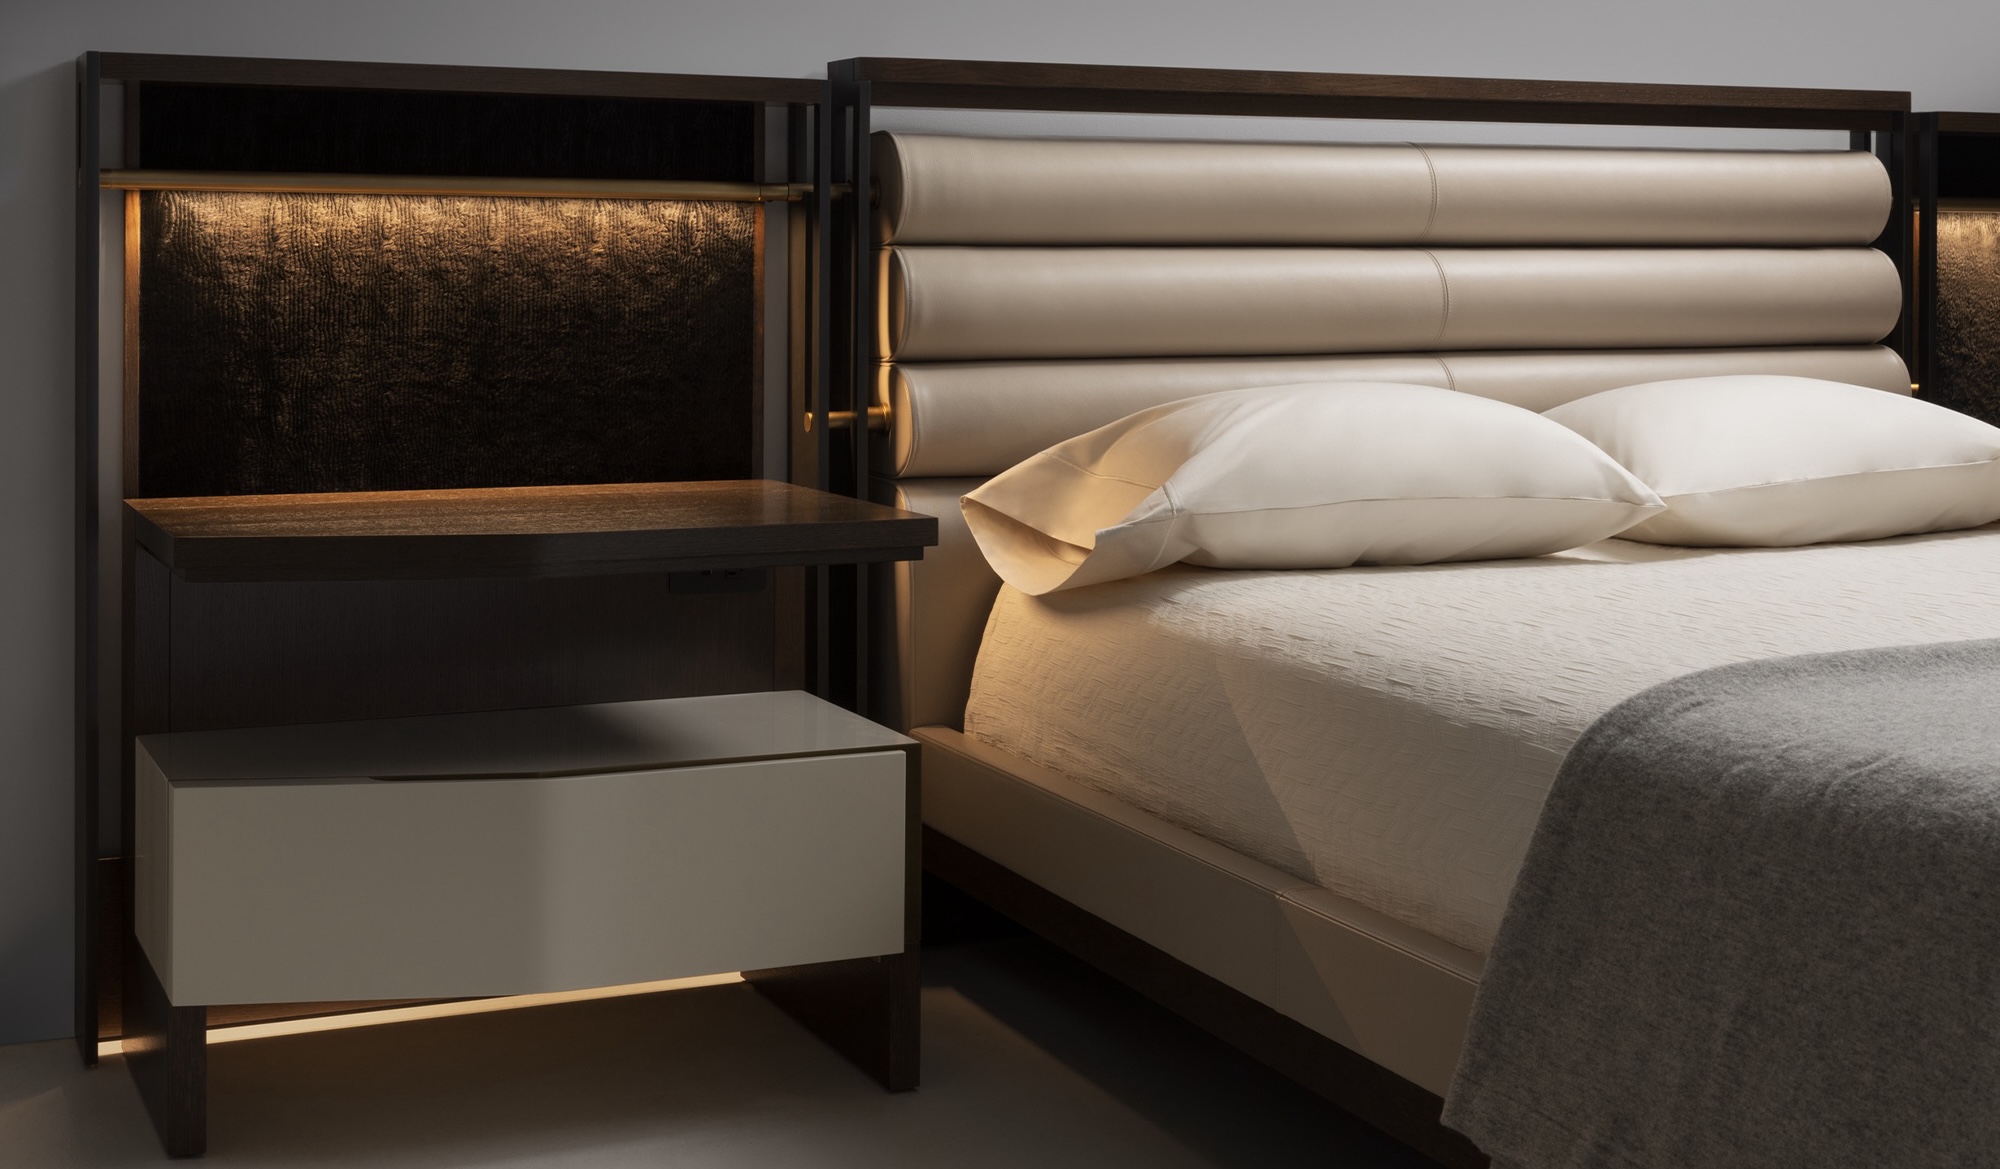 House-of-Hunt-Interior-Design-Chicago-Product-Bed-Frame-and-Night-Stand